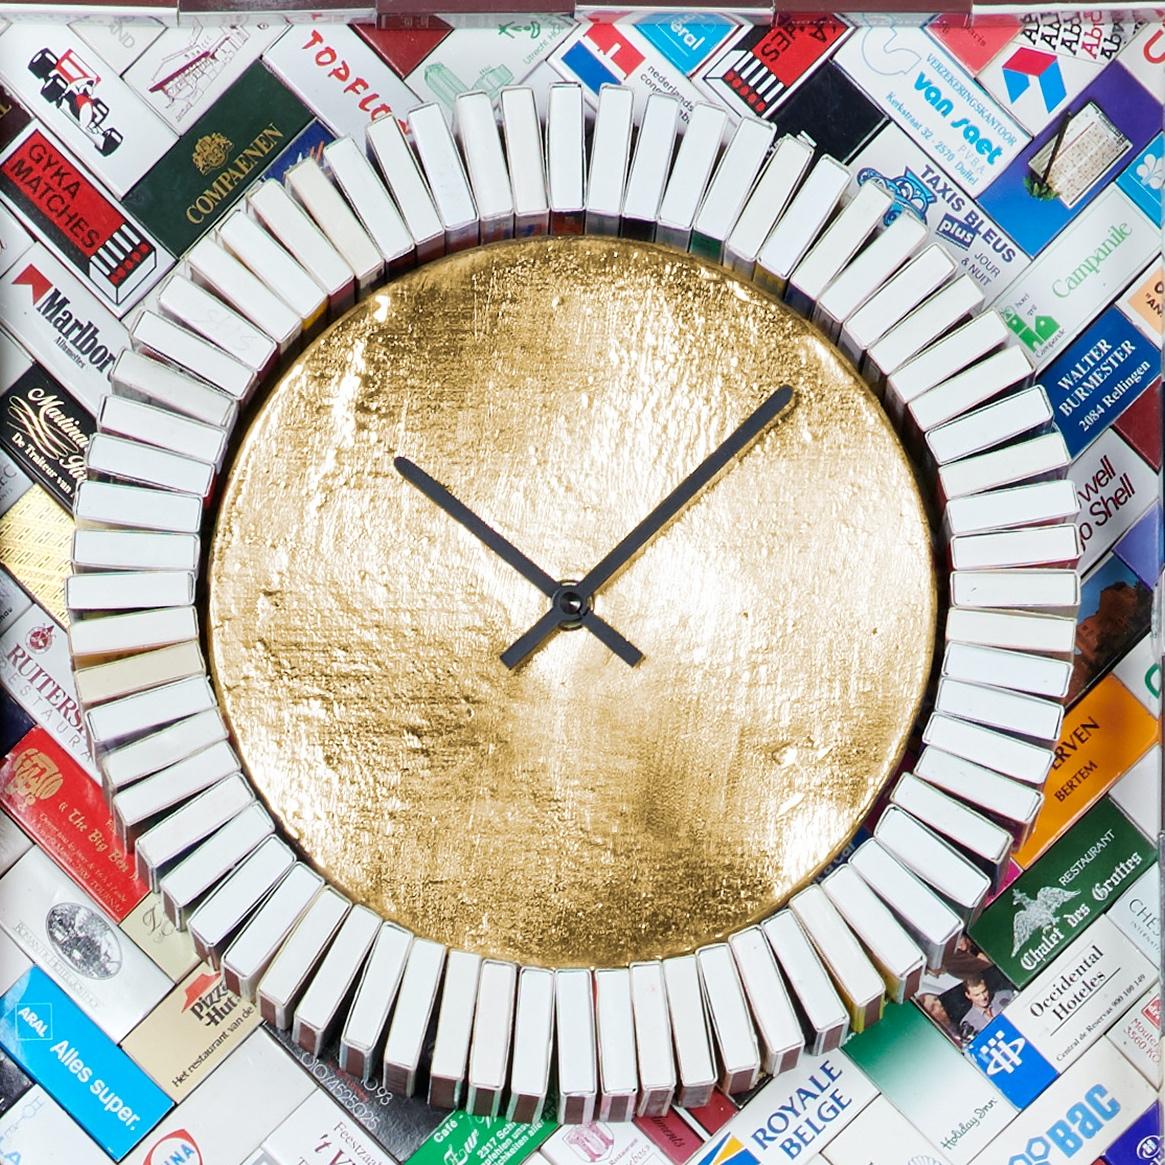 This clock consist of more than 3.000 matchboxes from all over the world, stemming from personal collections that go back almost a 100 years. Behind every matchbox lies a story. The ‘Cherished’ collection is Diederik Schneemann’s latest project